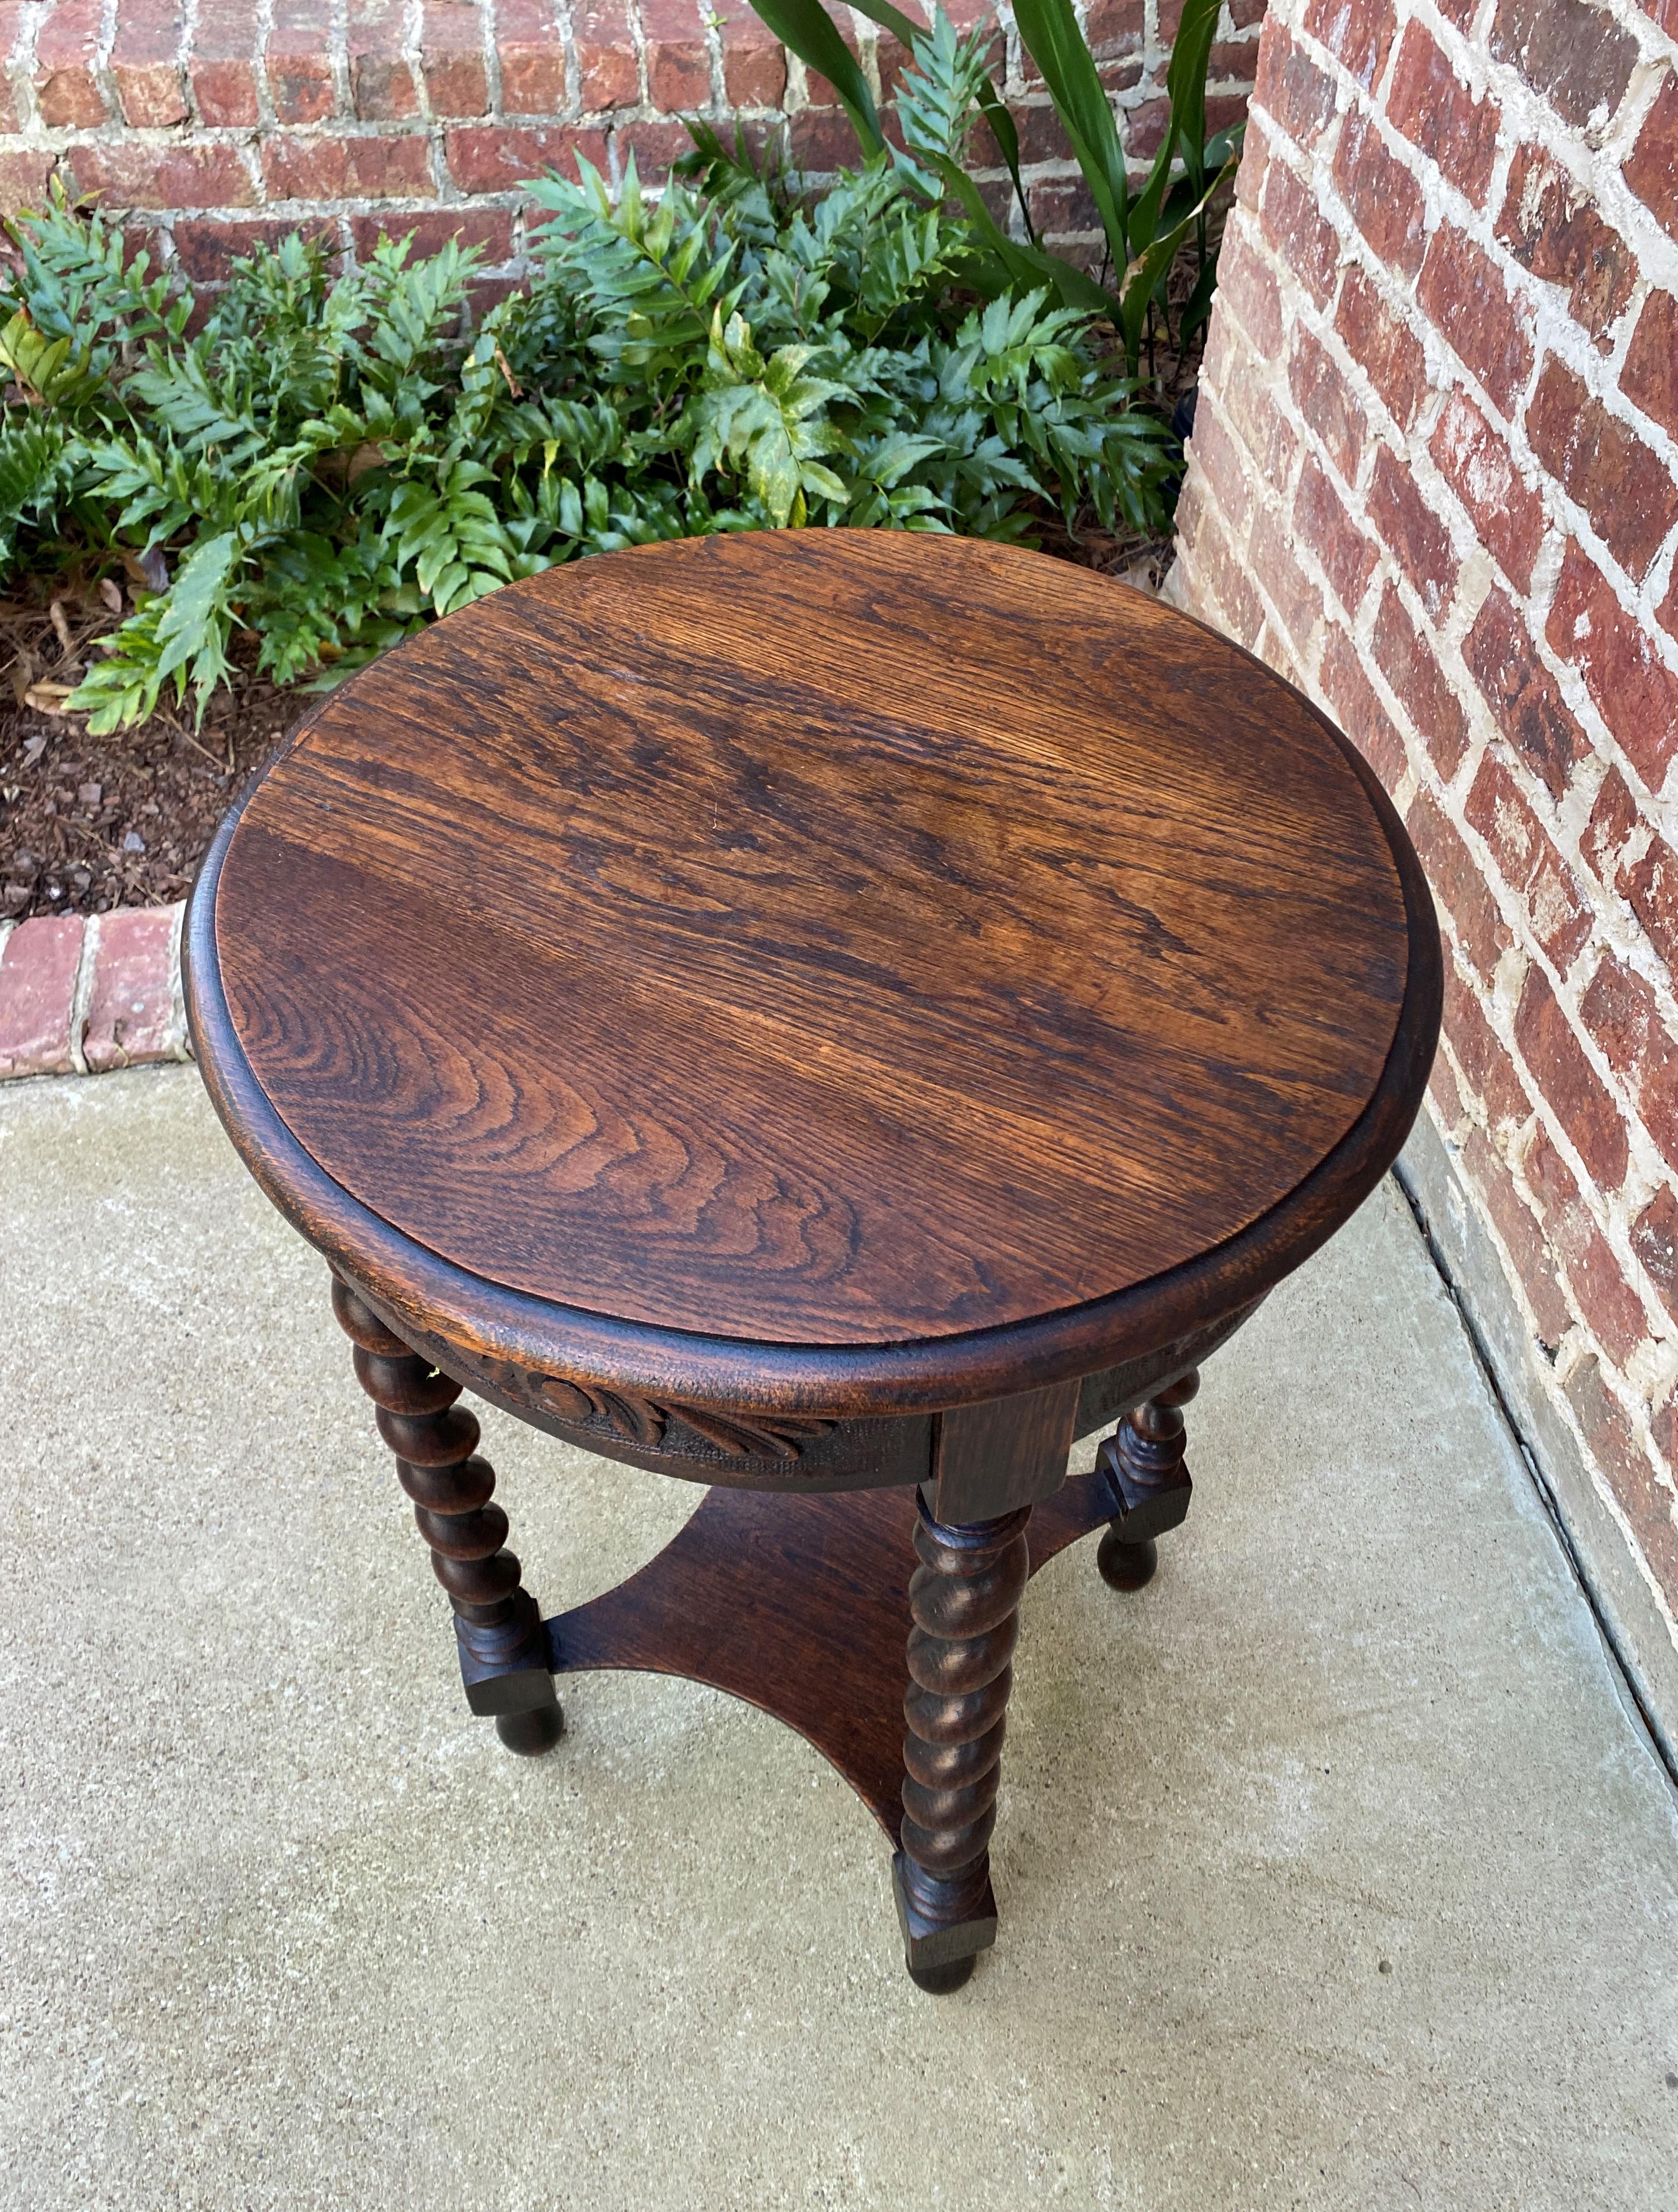 Antique English Round Table End Table Occasional Table Barley Twist Oak 2-Tier 8